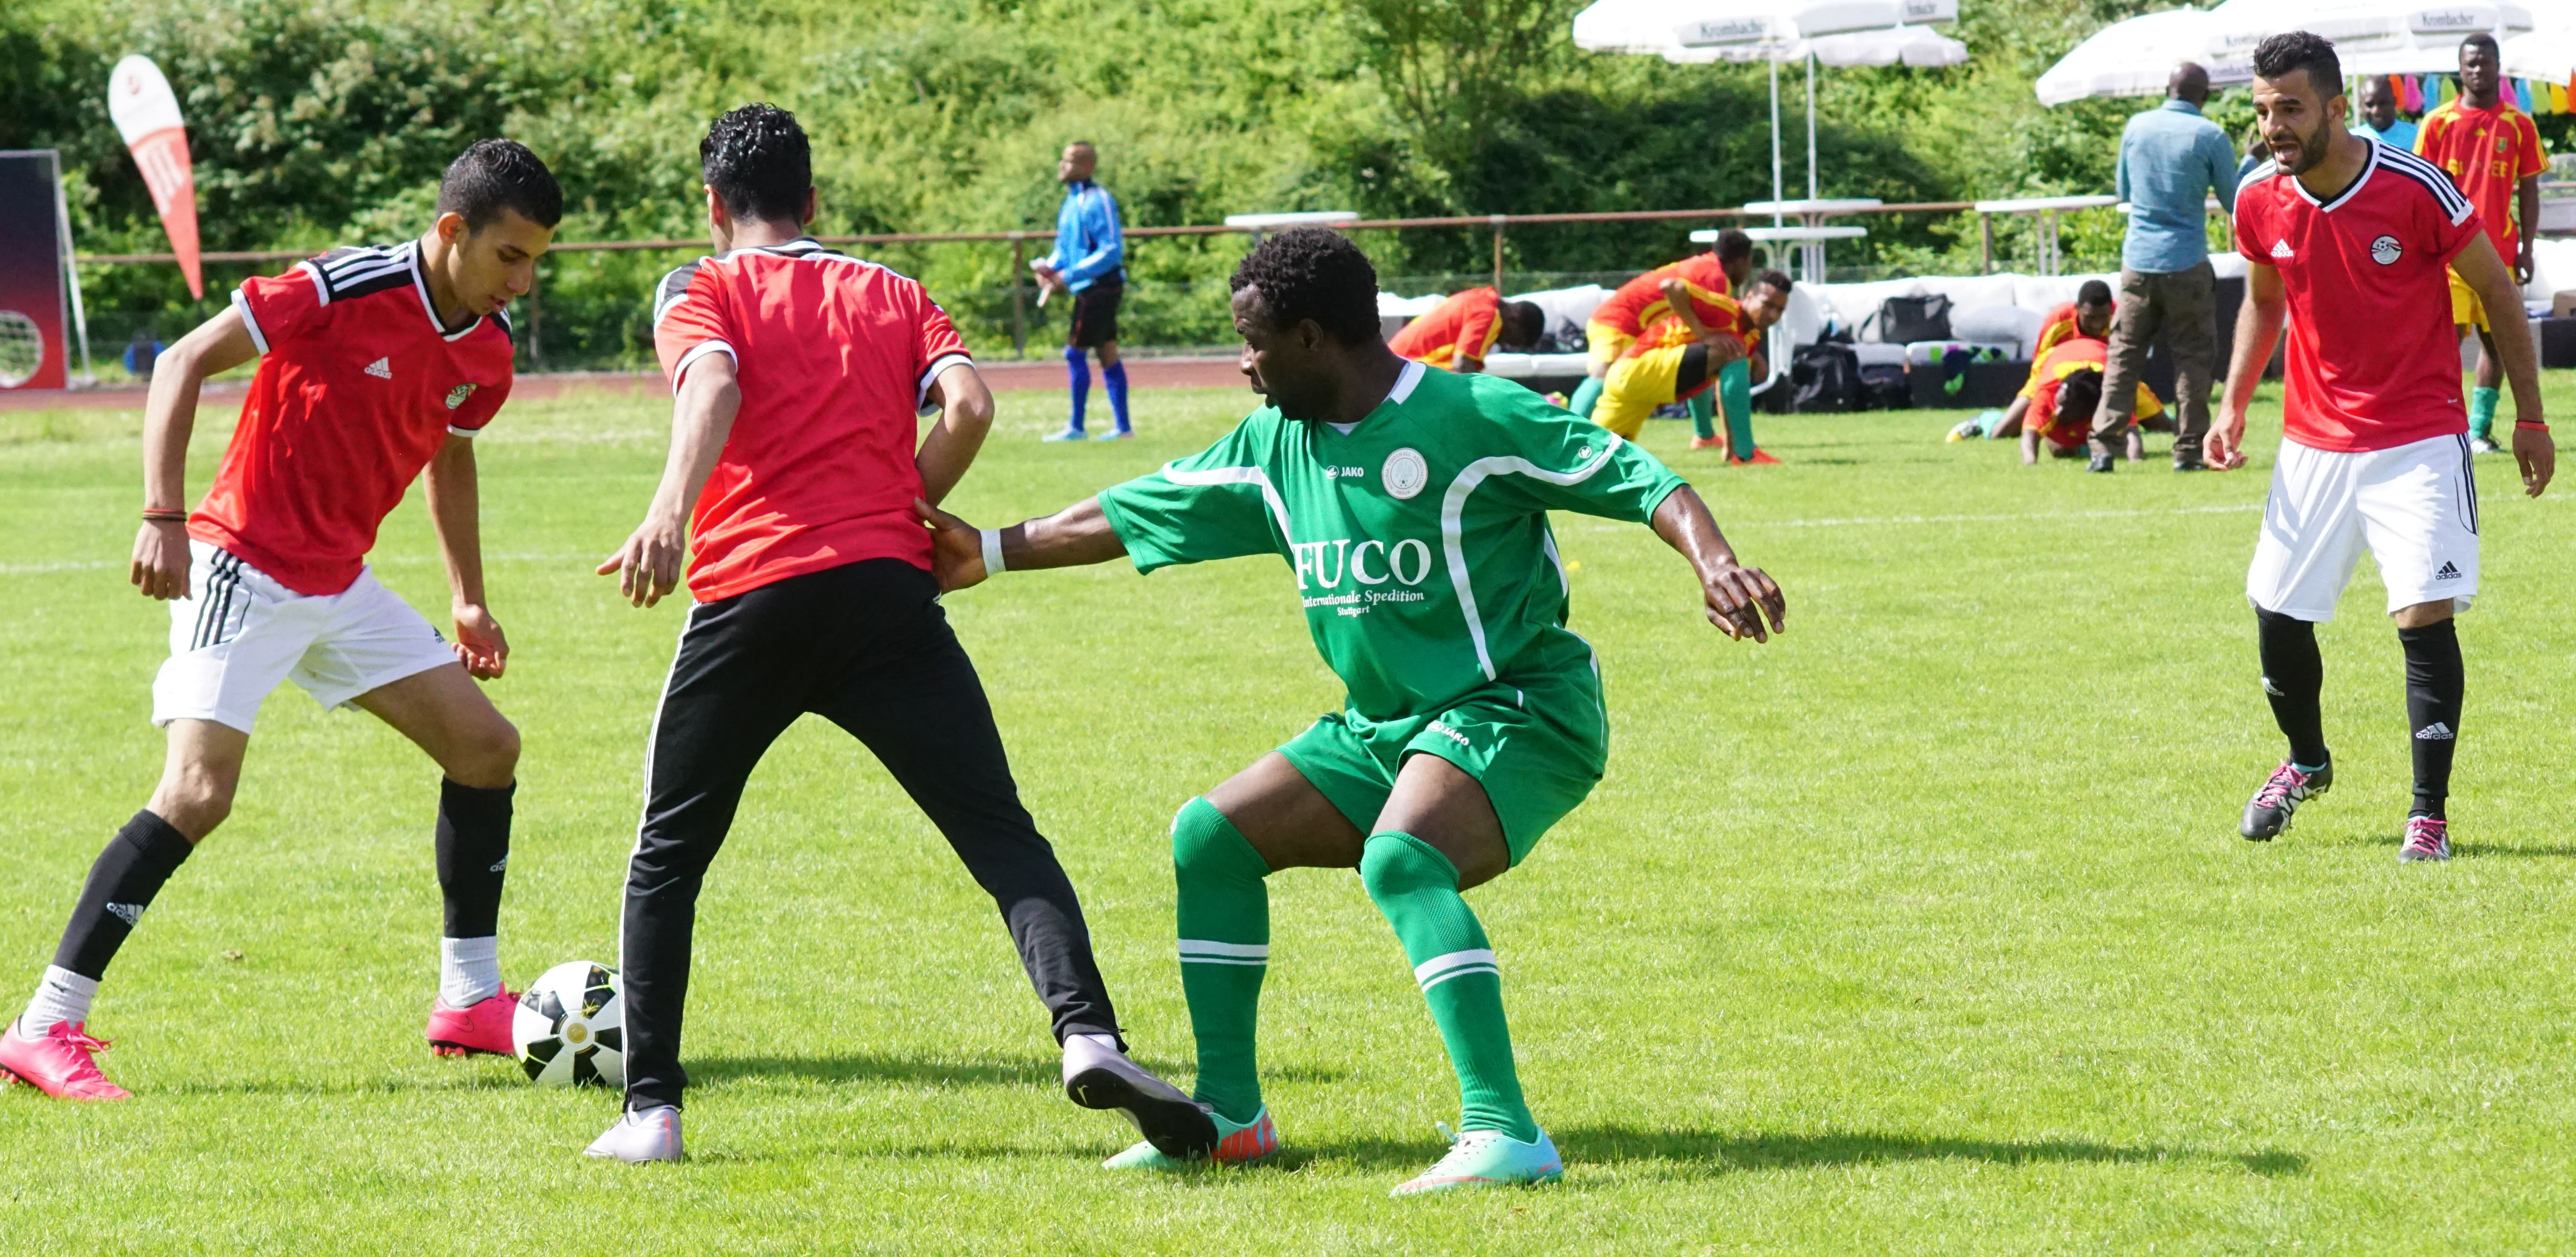 Team Morocco and Team Nigeria in action │ © Larry Bello/TAC